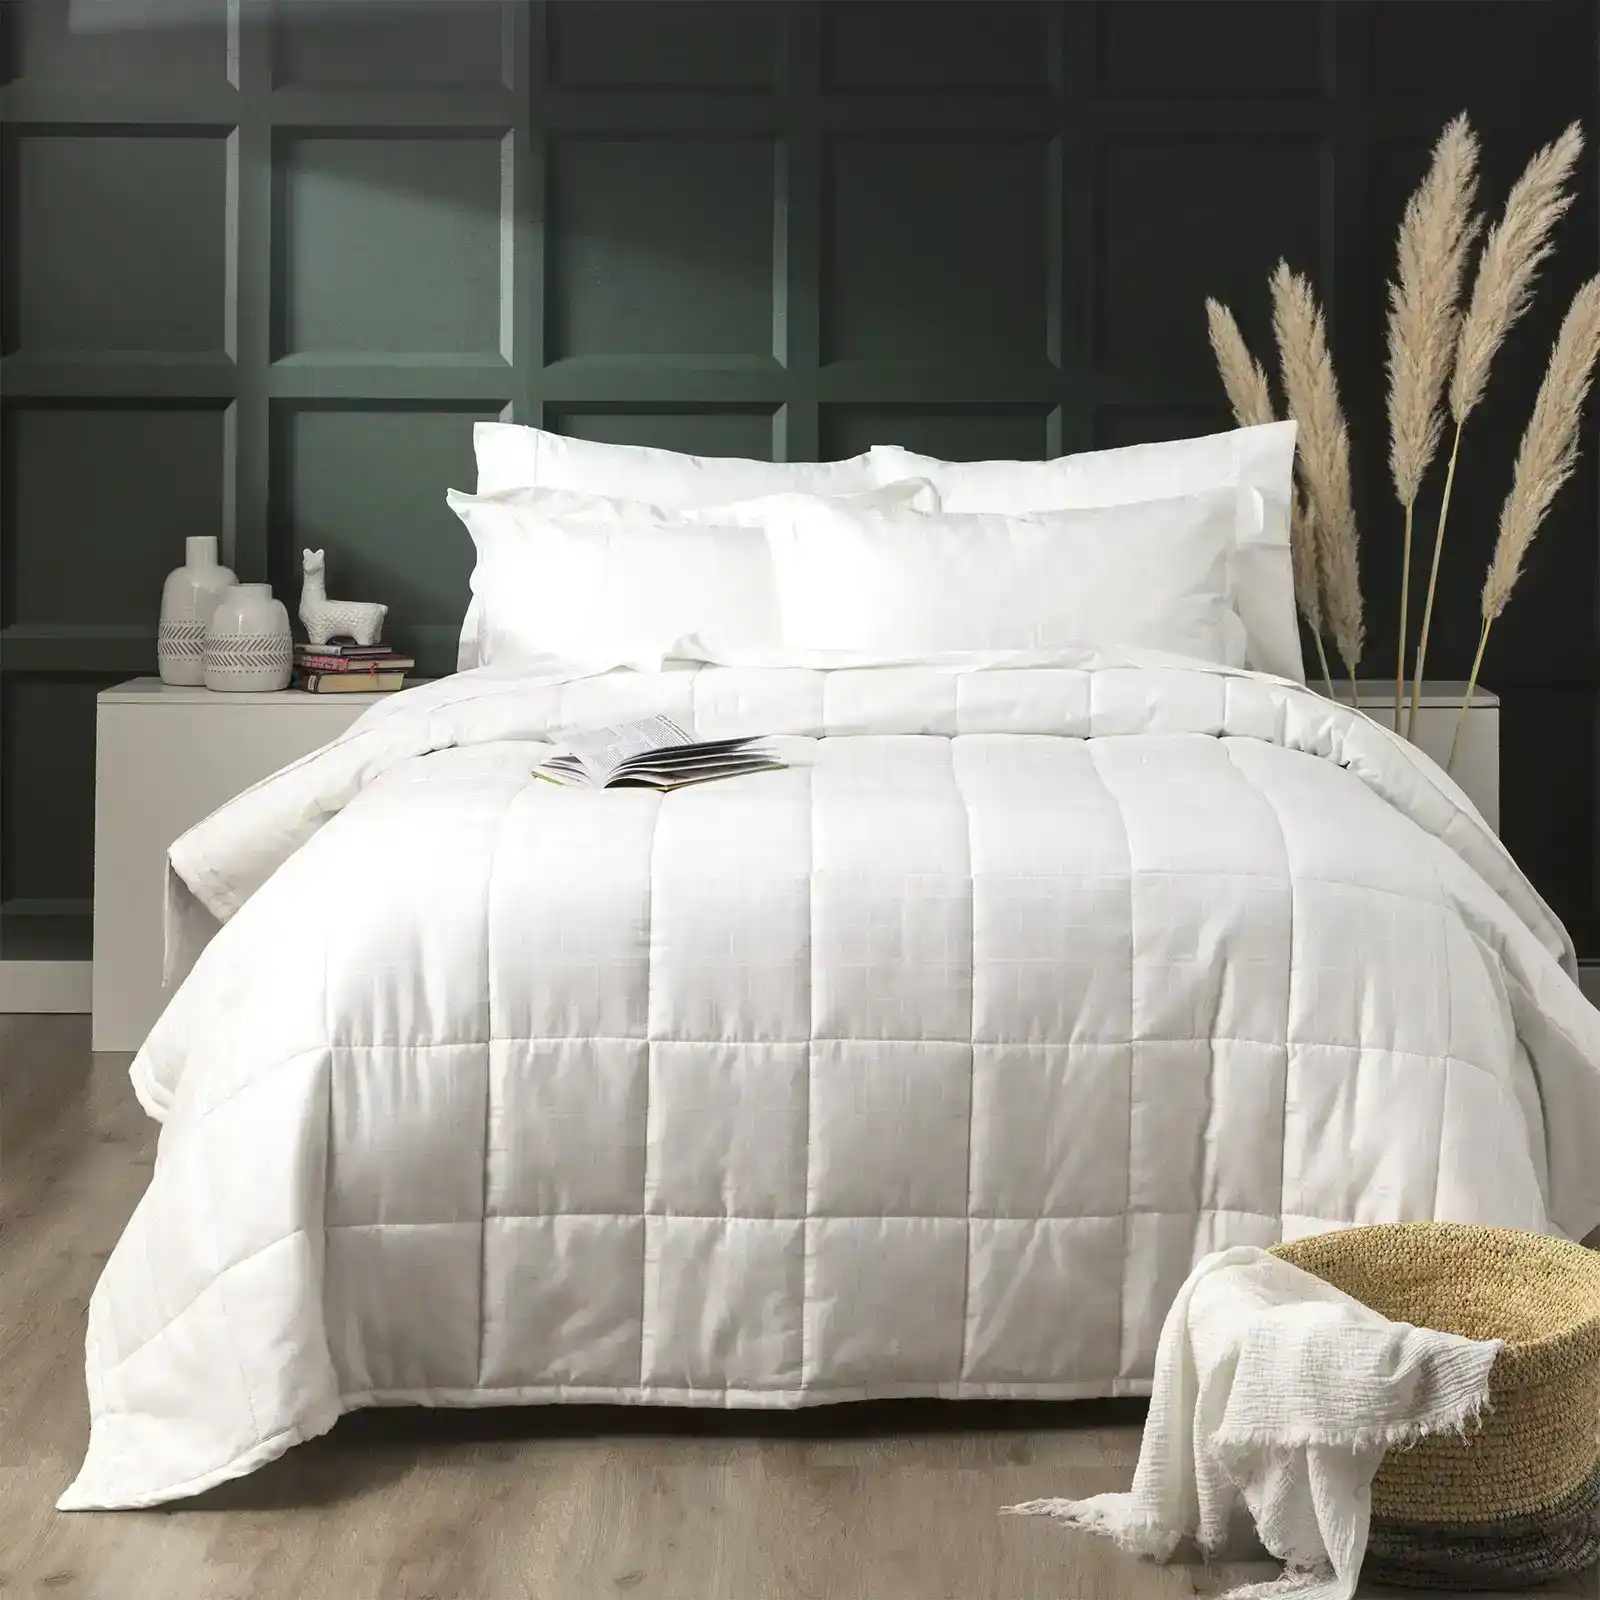 Ddecor Home Willow Queen Bed Comforter Set 500TC Cotton Jacquard Bedding White